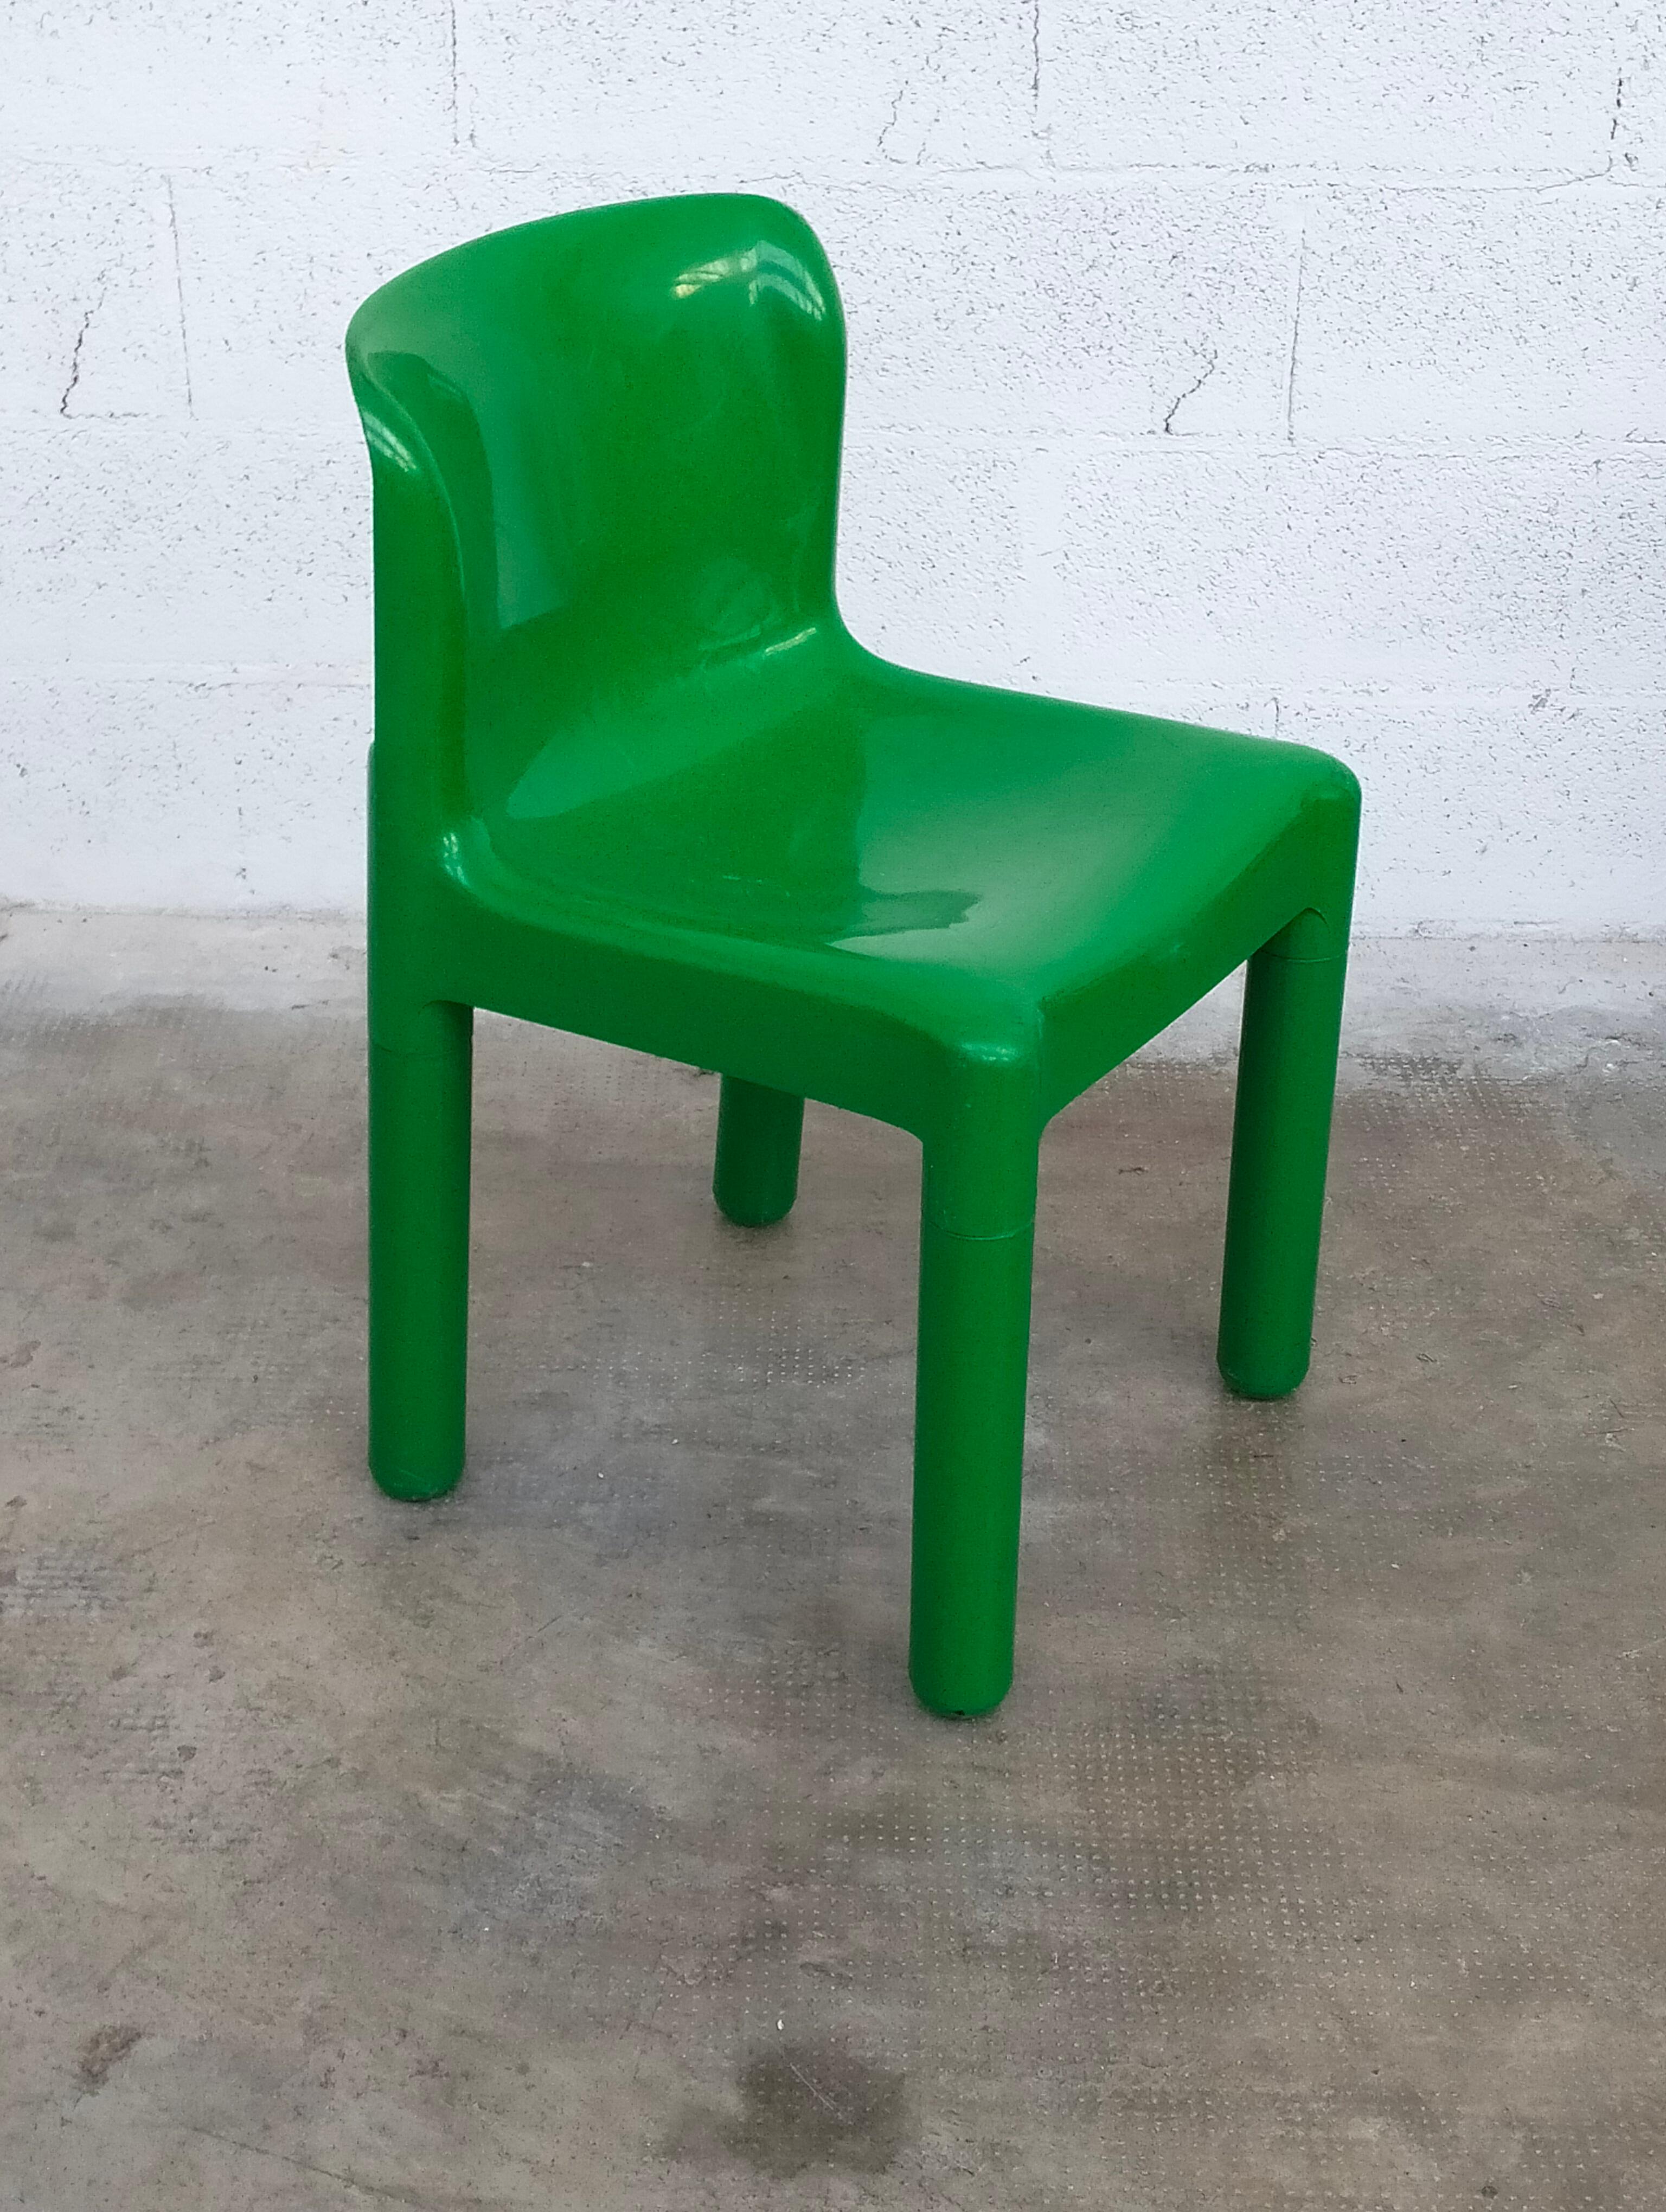 Italian Green Plastic Chairs 4875 by Carlo Bartoli for Kartell 1970s, Set of 4